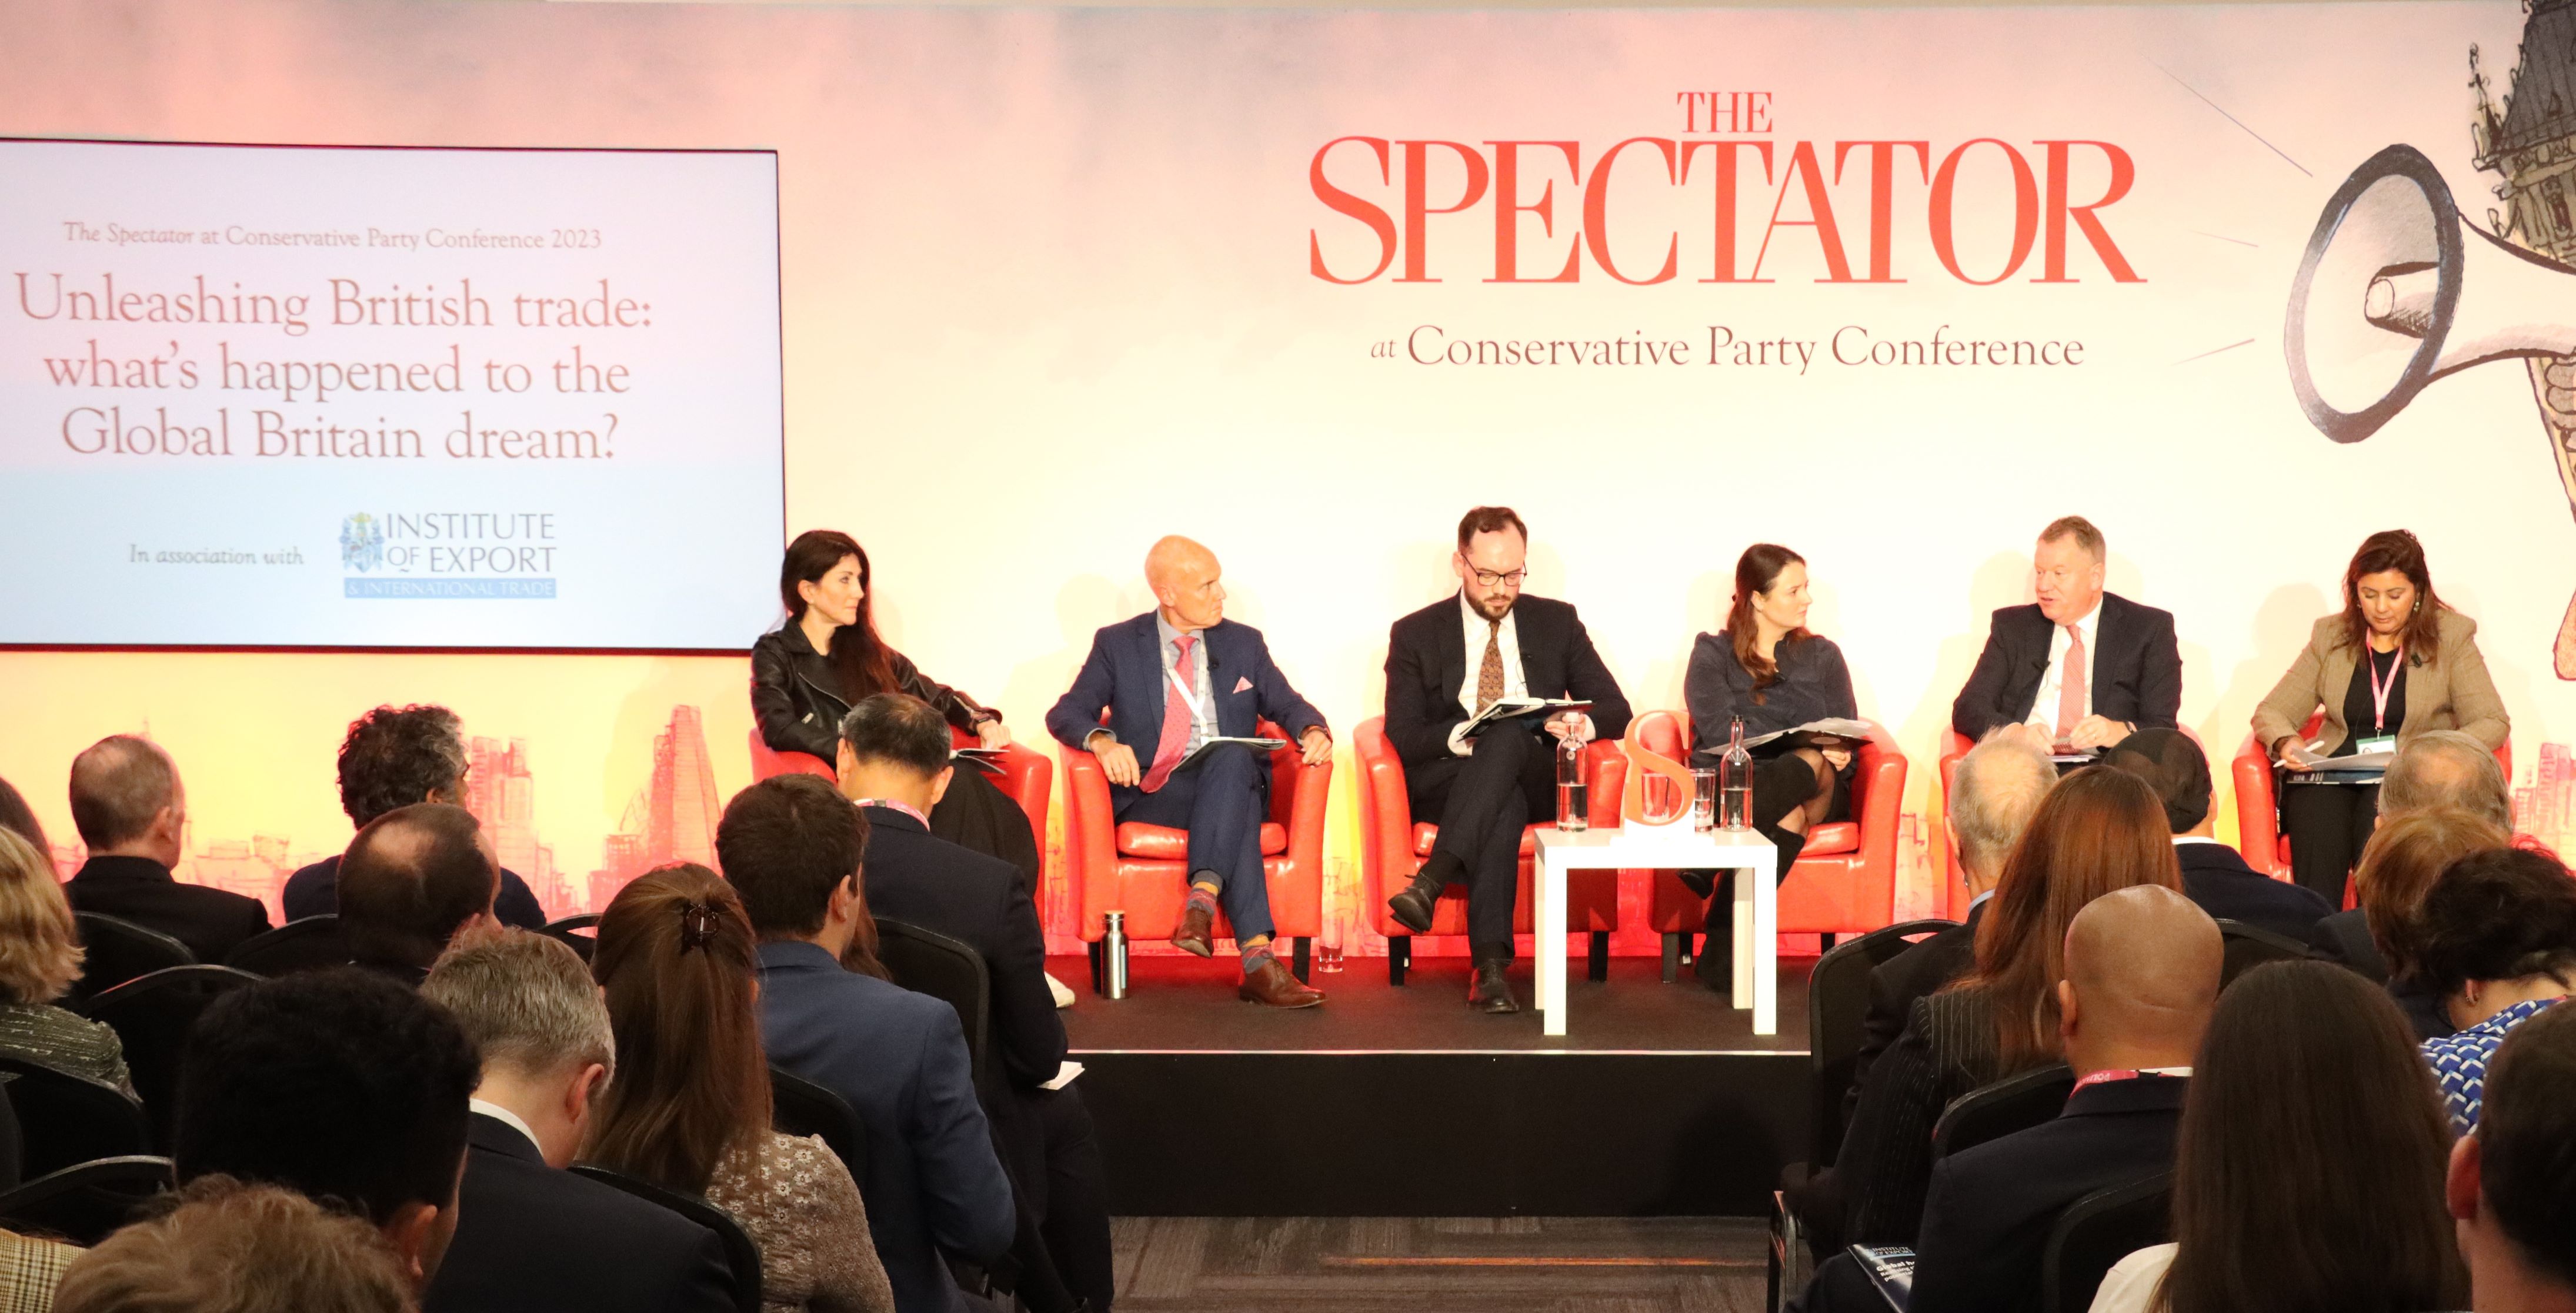 Spectator Panel at Conservative Party Conference, including Lord Frost, Sam Lowe and Nusrat Ghani, on Unleashing British Trade post-Brexit